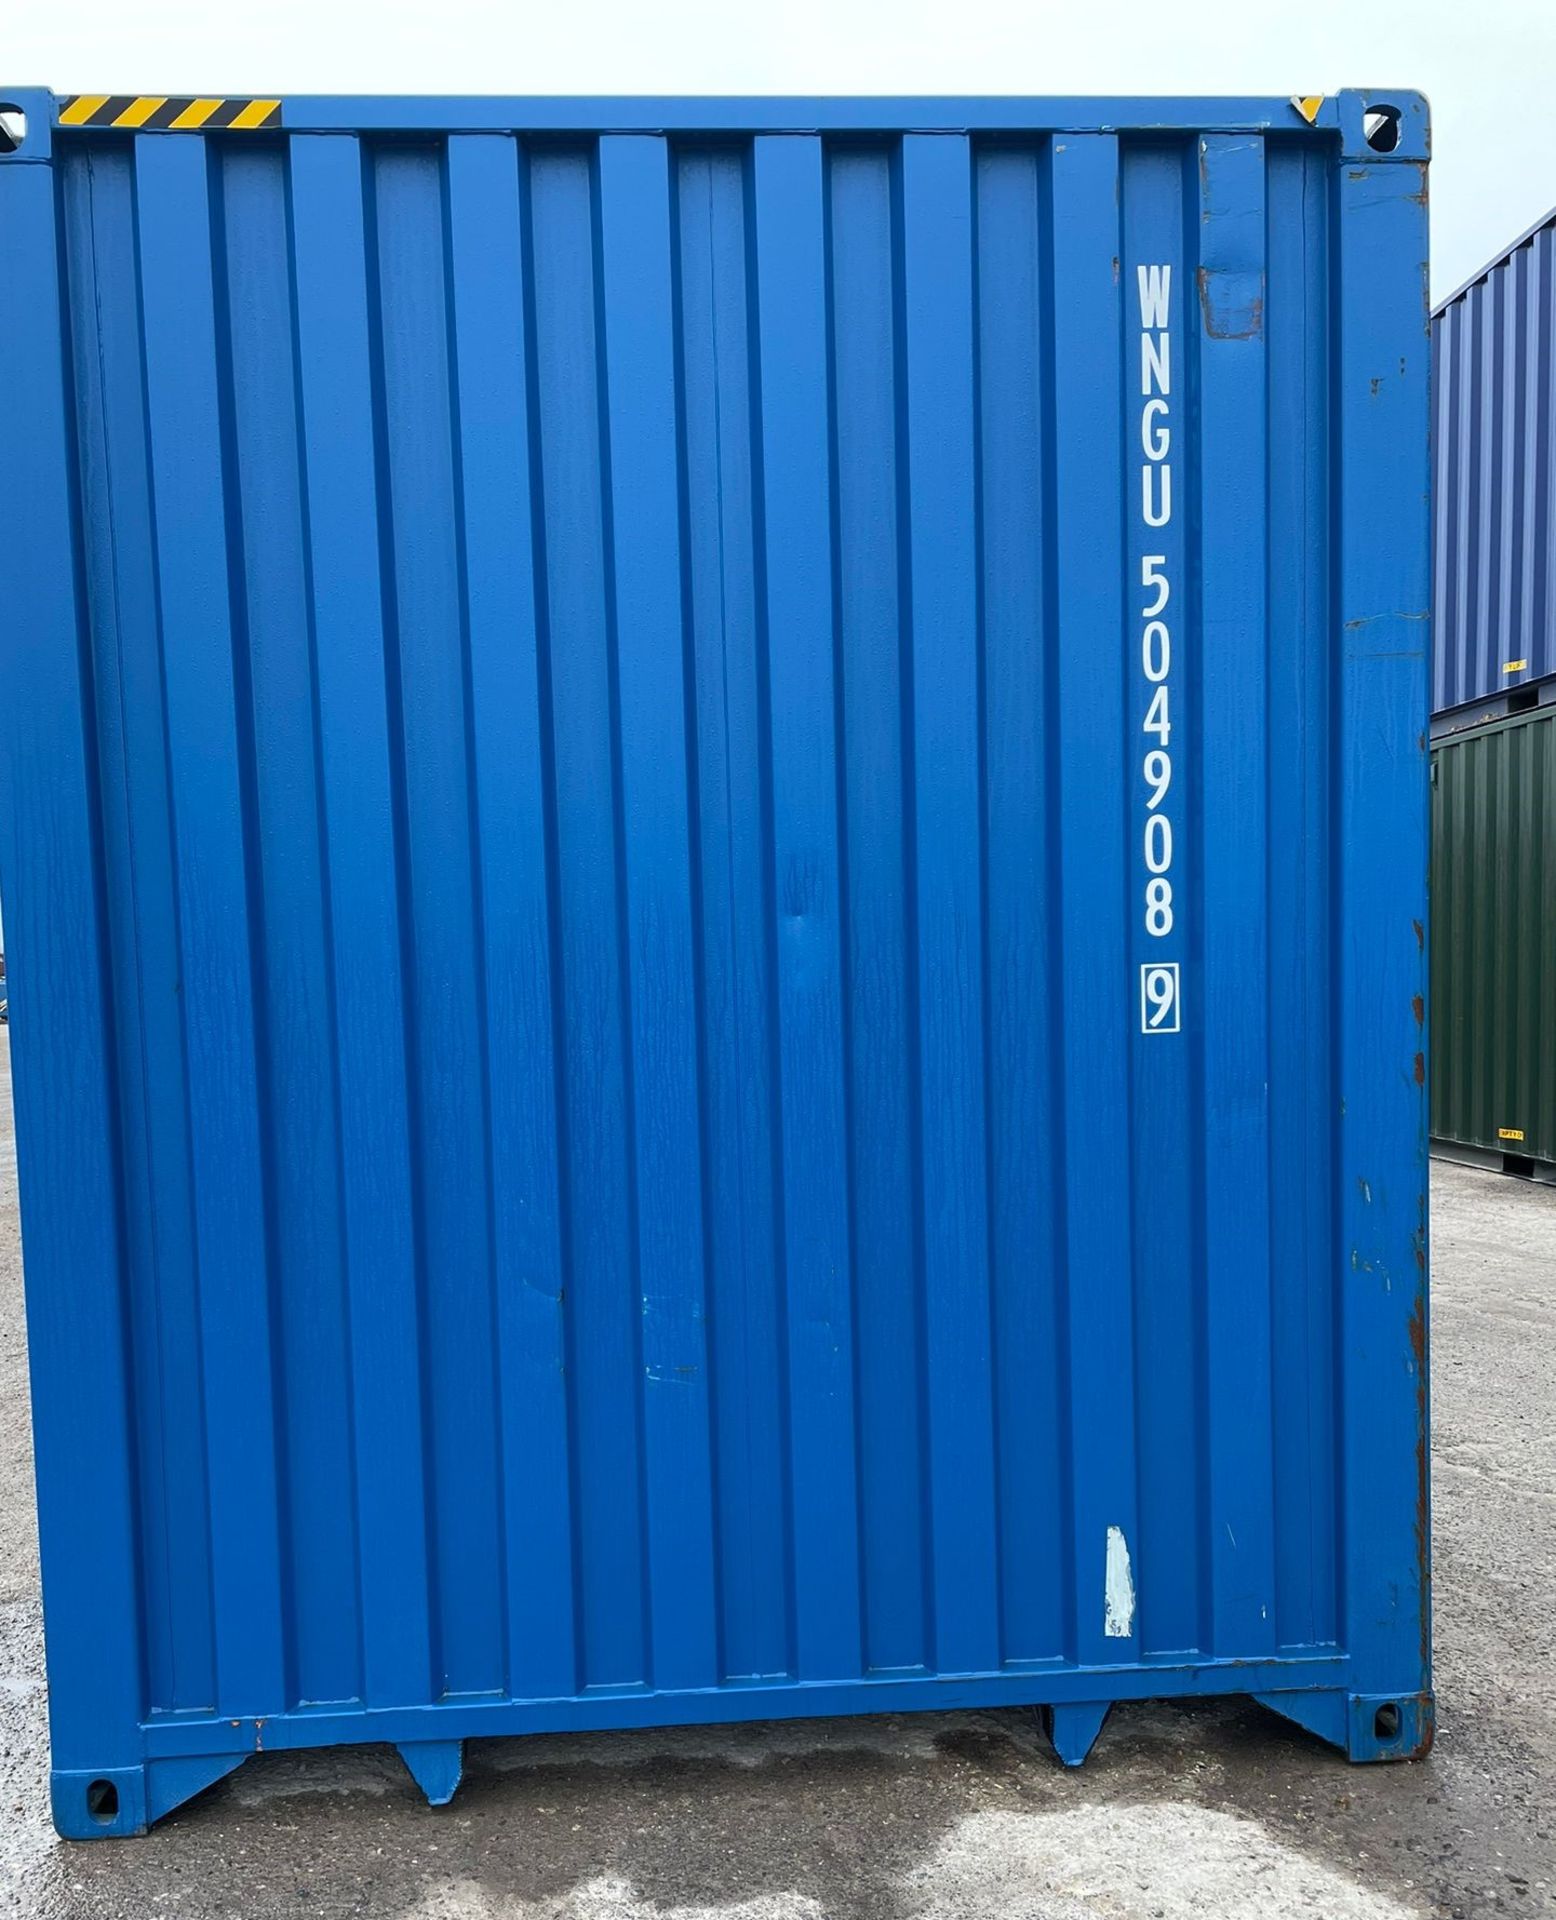 40ft HC Shipping Container - ref WNGU5049089 - Image 3 of 5